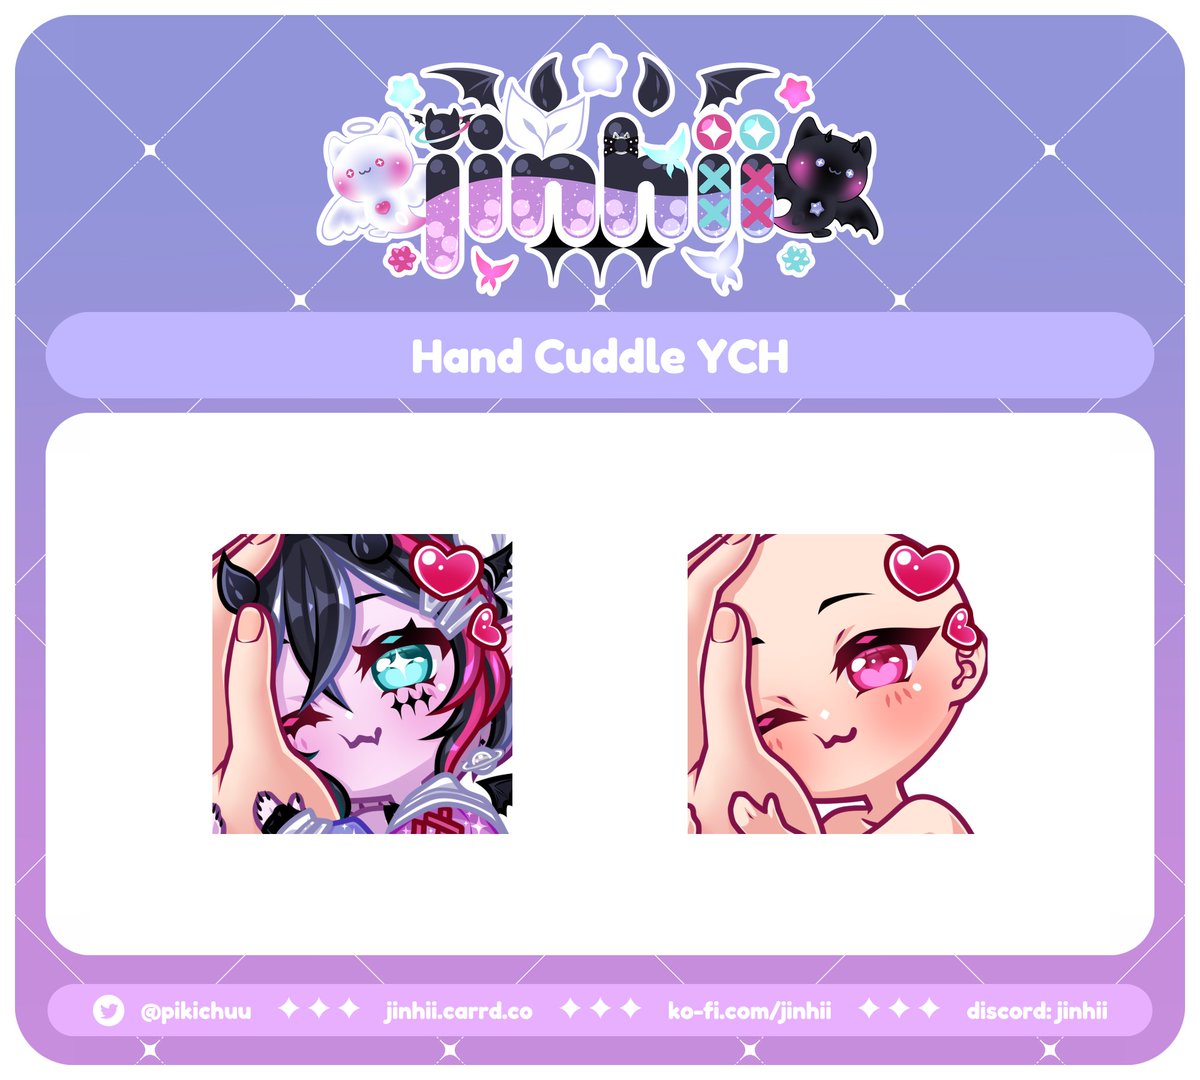 💖Hand Cuddle YCH Raffle💖 Finally finished and listed this YCH on my ko-fi! TO ENTER: ✨Like/RT/Follow ✨Comment with your fav emoji! ✨1 winner will get a hand cuddle ych~ ✨Raffle ends on May 15th!